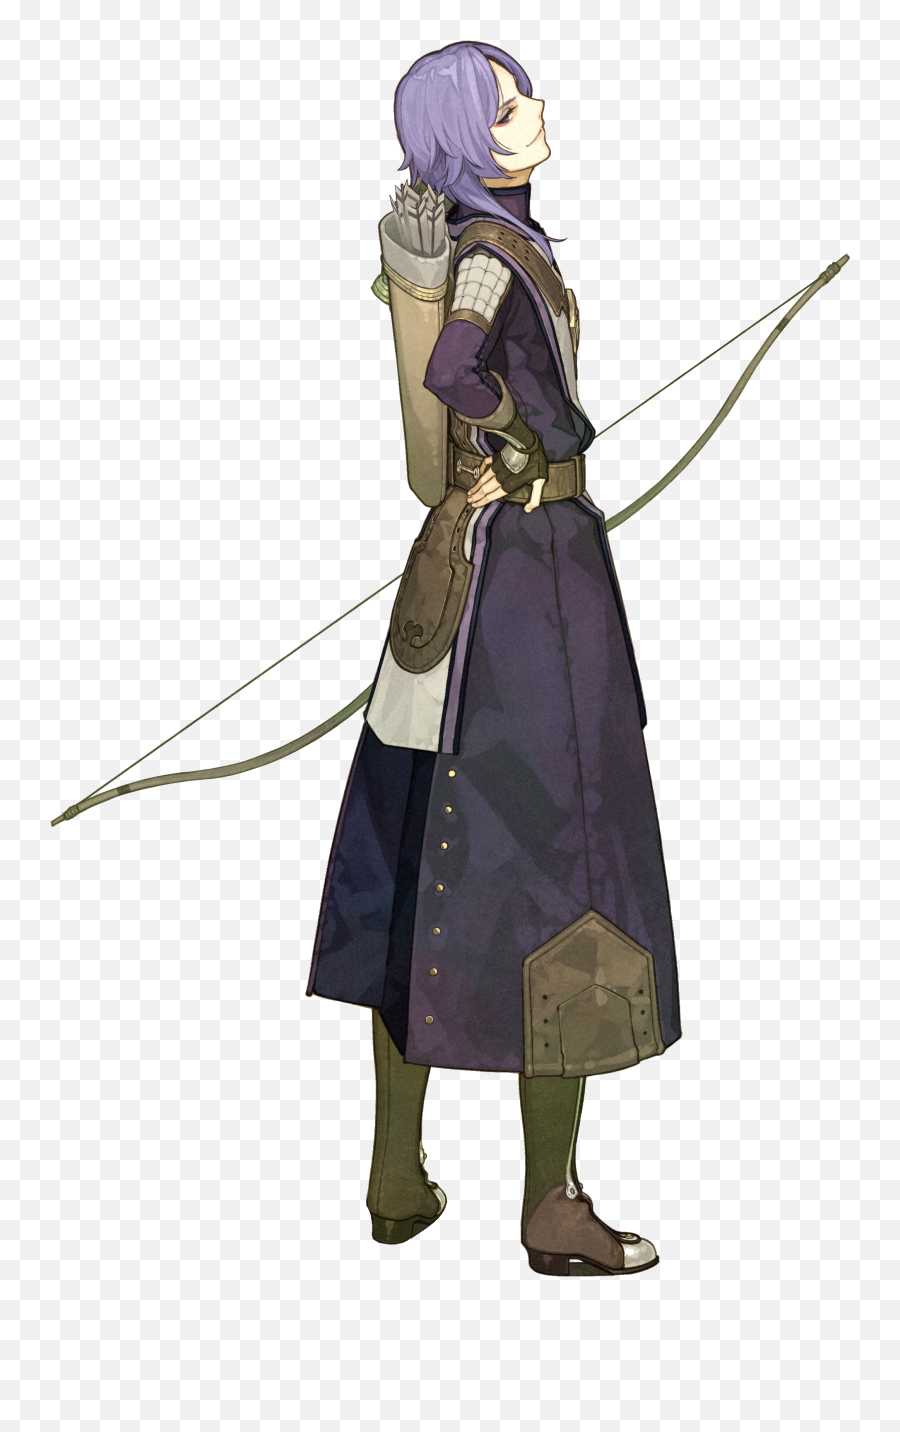 Pride 2021 The Power Of Leonu0027s Innocent Crush In Fire - Fire Emblem Echoes Leon Emoji,Seat Emotions On Fire Emblem Character Sprites